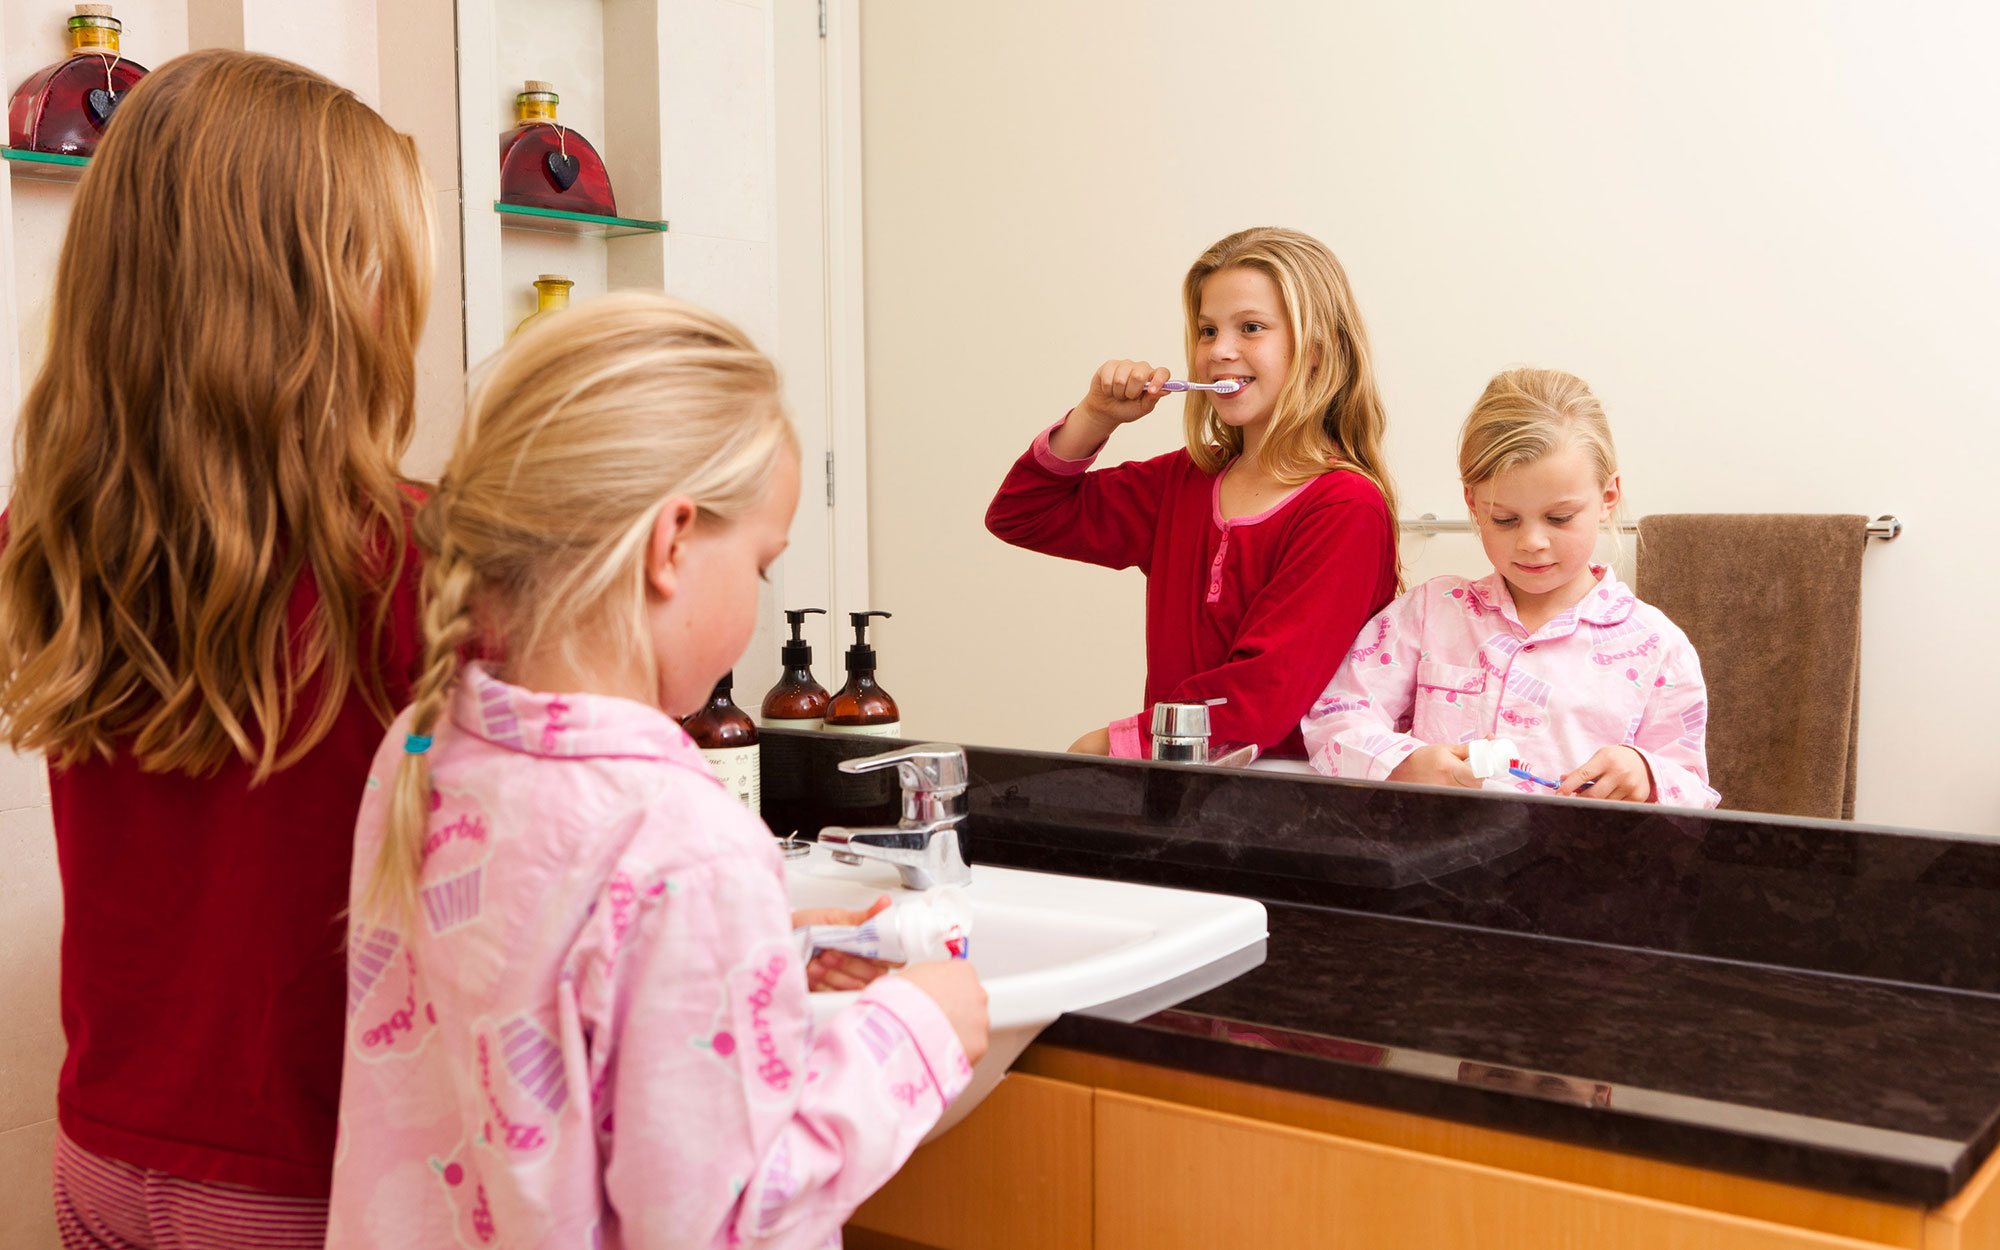 Two young girls wearing pink and brushing teeth in the mirror